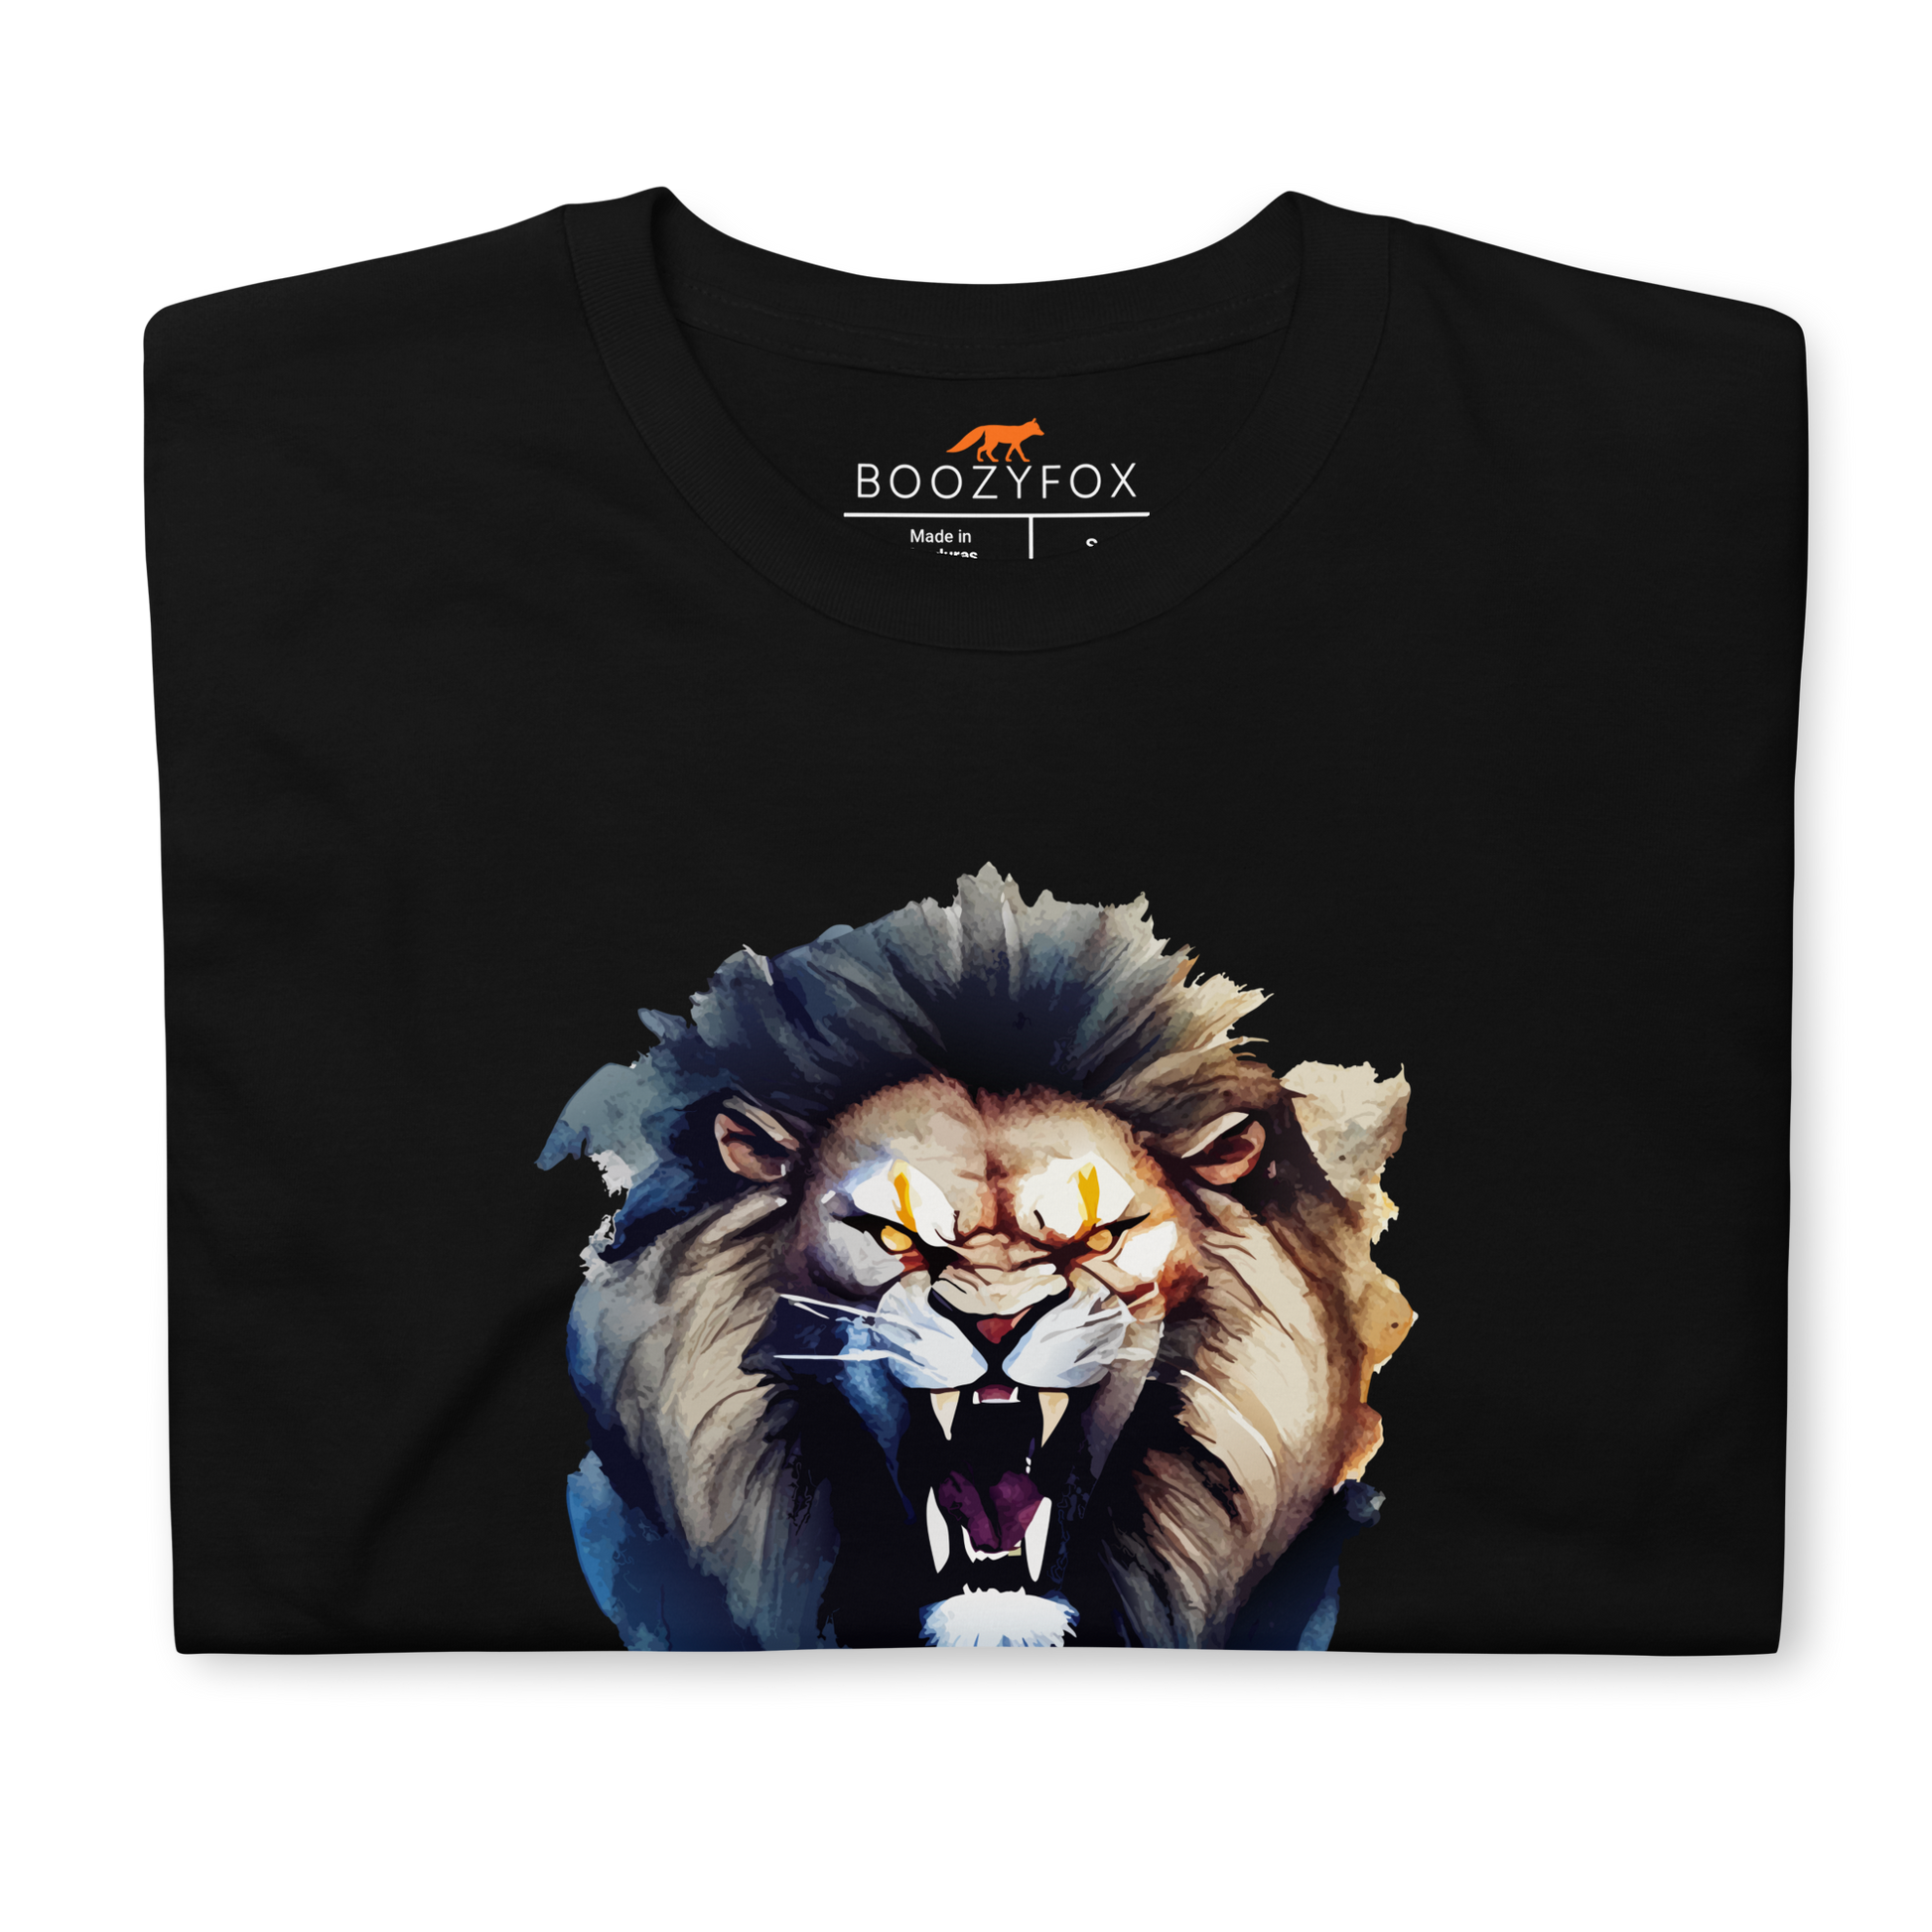 Front details of a Black Lion T-Shirt featuring a Roar-Some graphic on the chest - Cool Graphic Lion T-Shirts - Boozy Fox